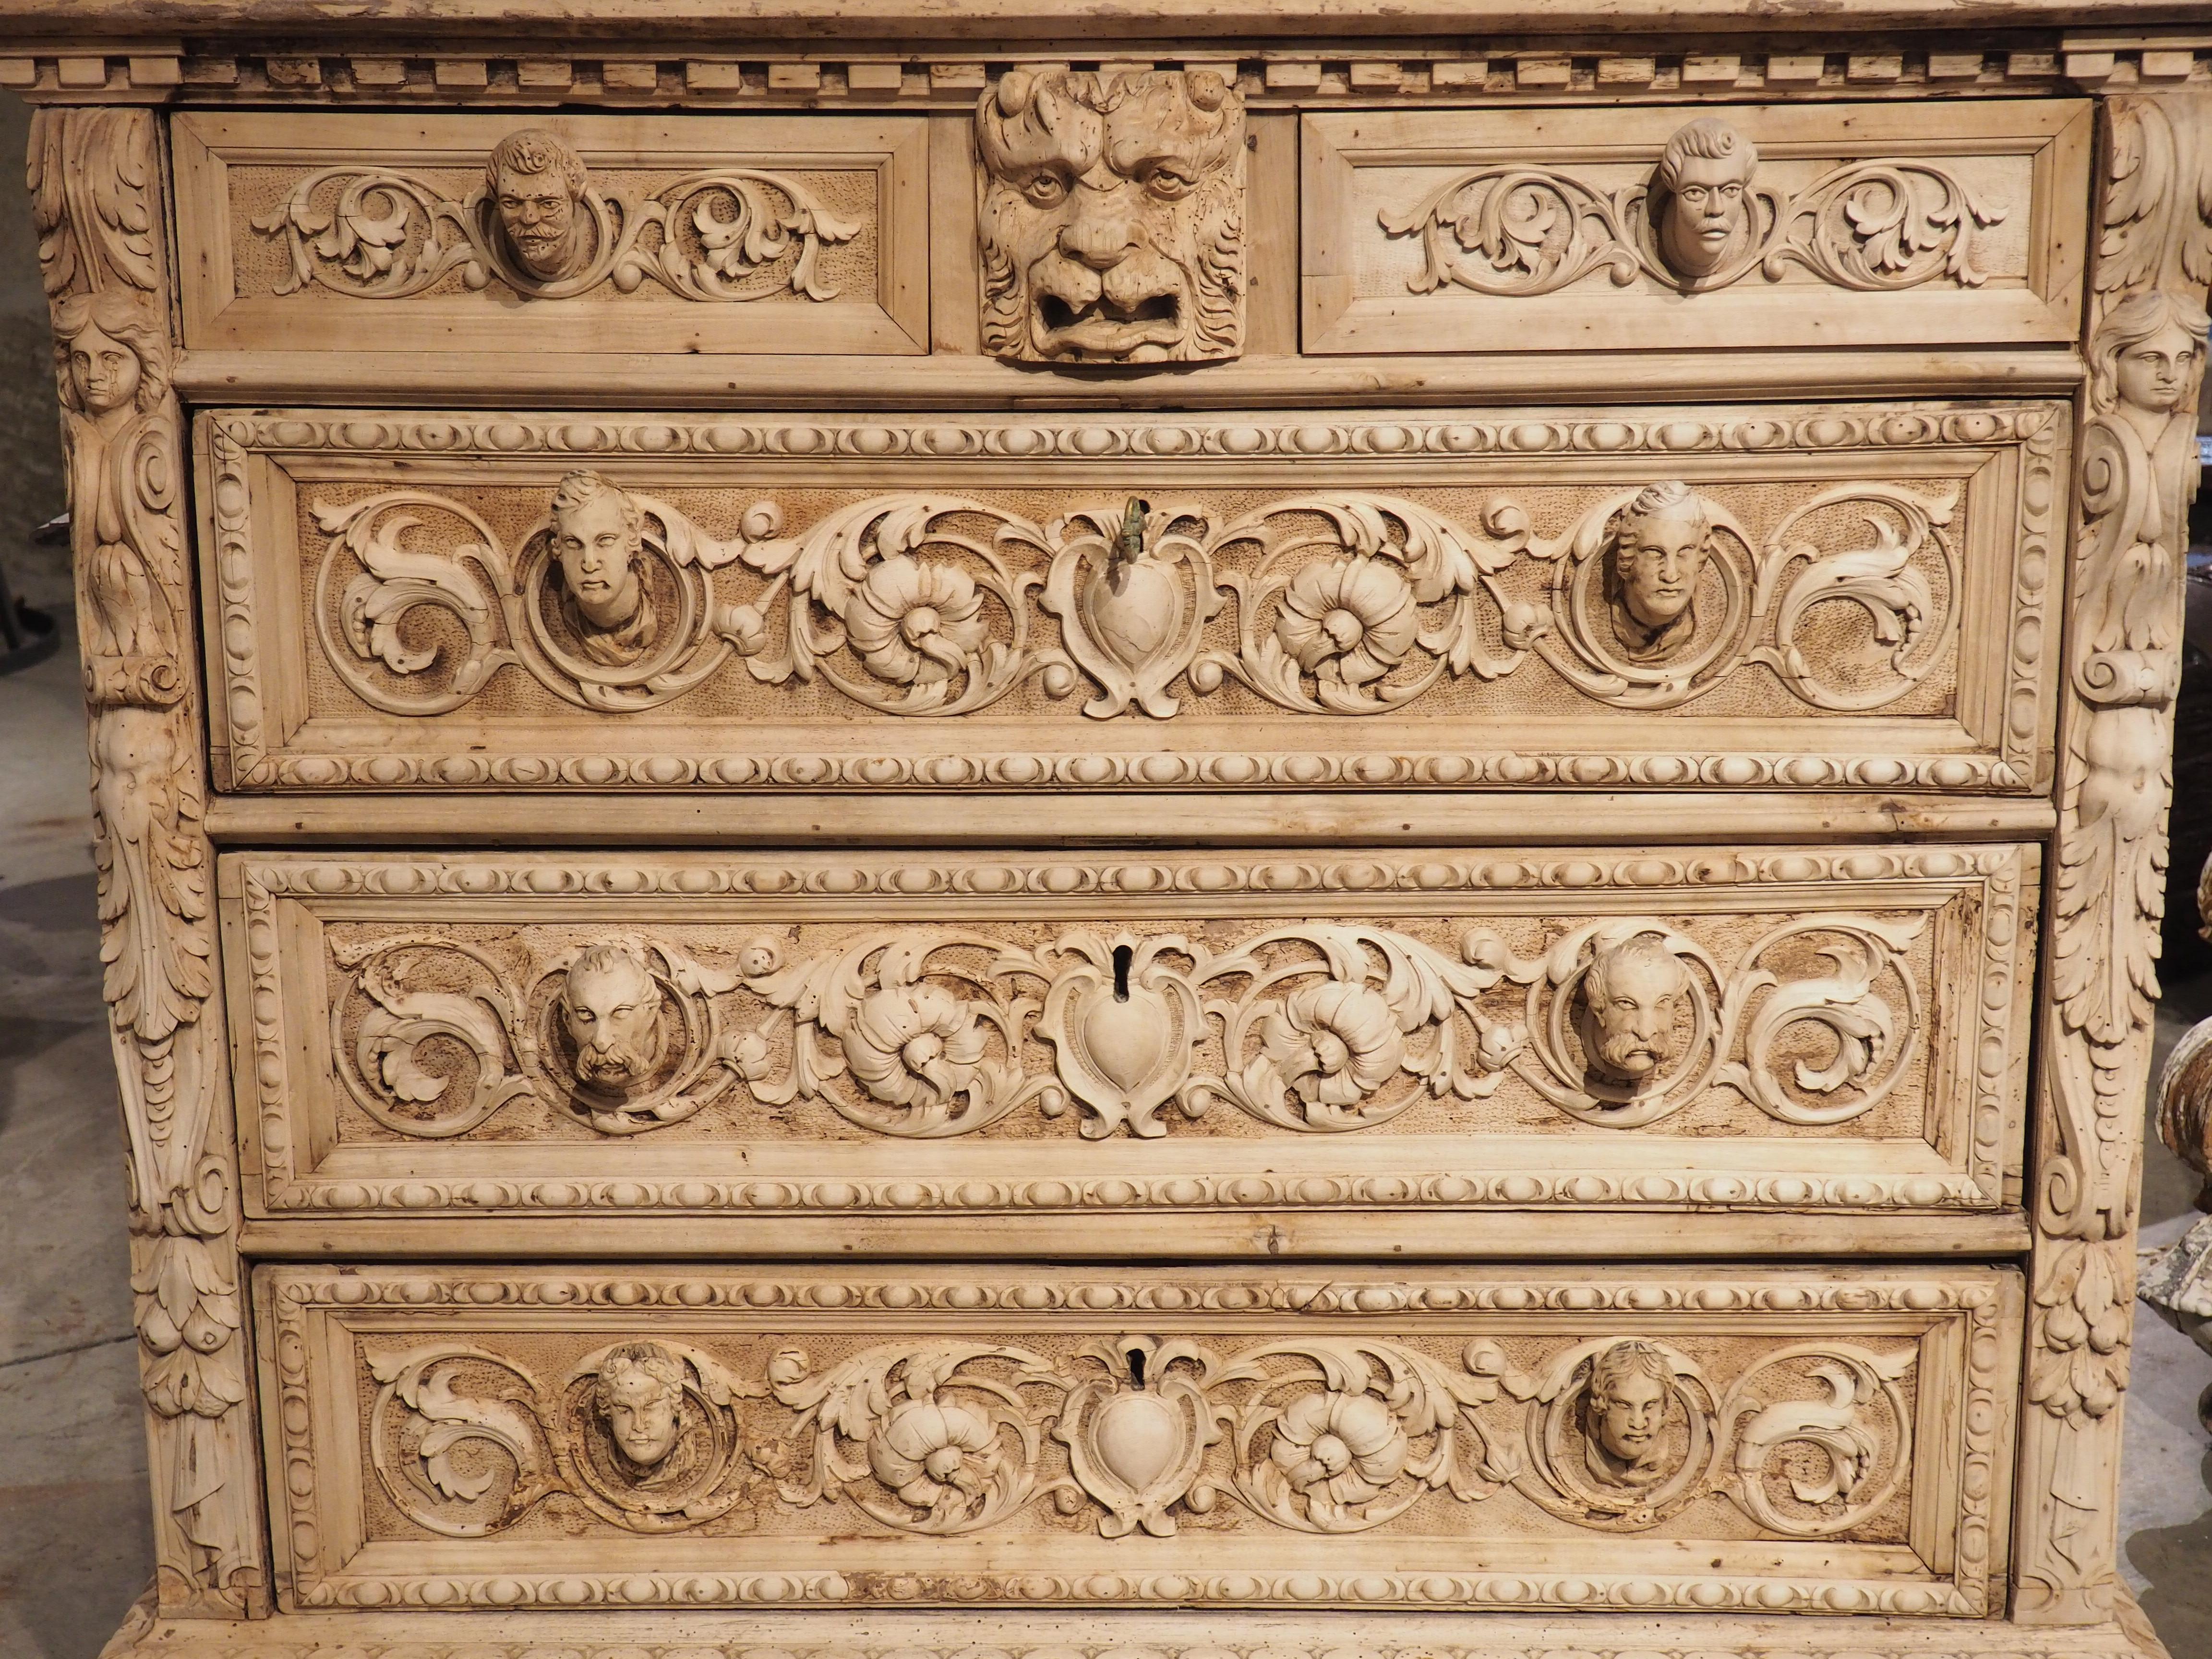 This majestic, bleached walnut commode was hand-carved by an Italian master in Florence, circa 1870. The details of the floral rinceaux, which are dotted with high relief mascarons are of the highest craftsmanship, beautifully eliciting the